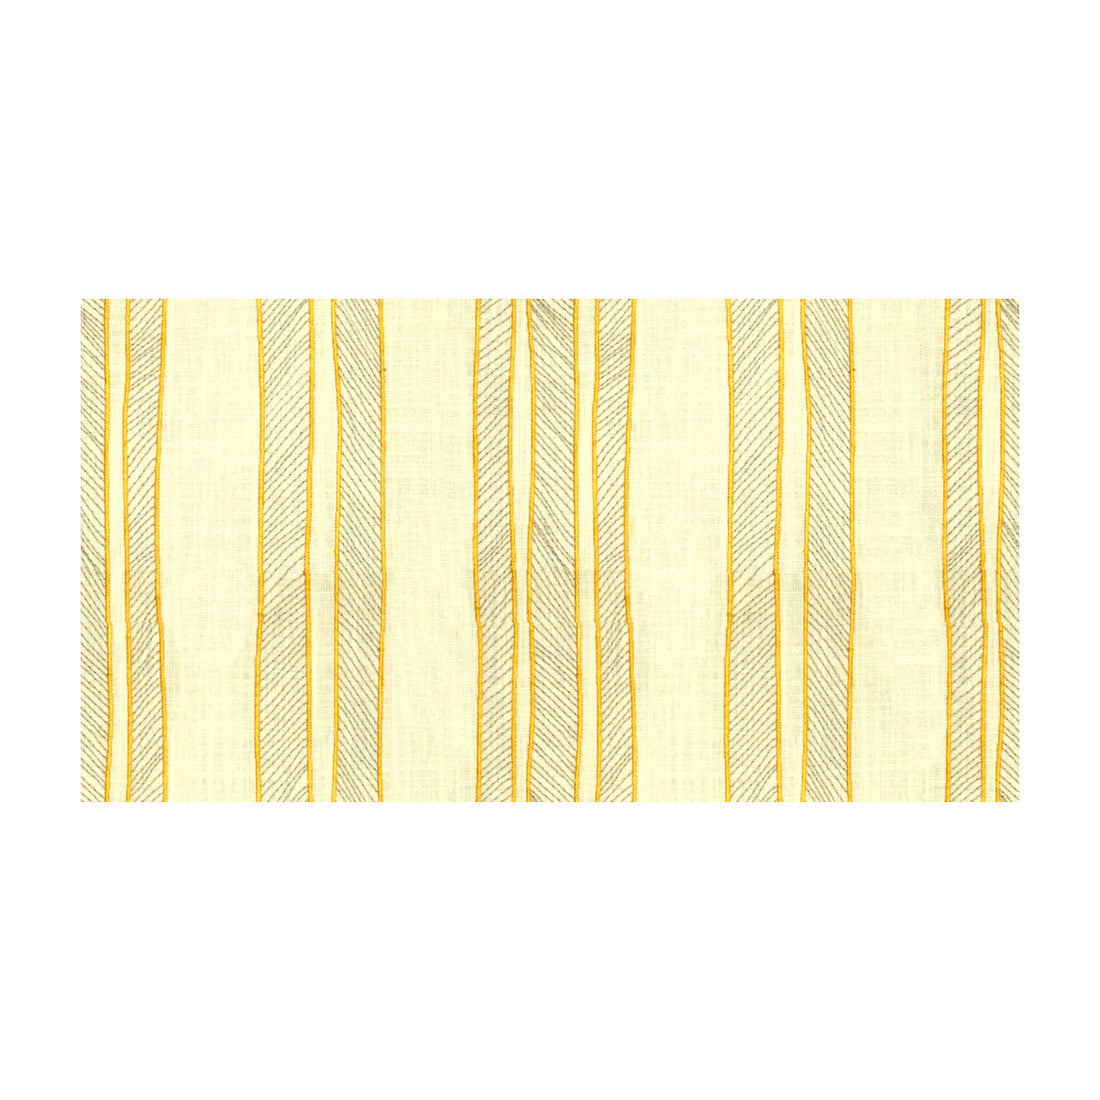 Cords fabric in sunny color - pattern 33430.411.0 - by Kravet Basics in the Jeffrey Alan Marks Waterside collection